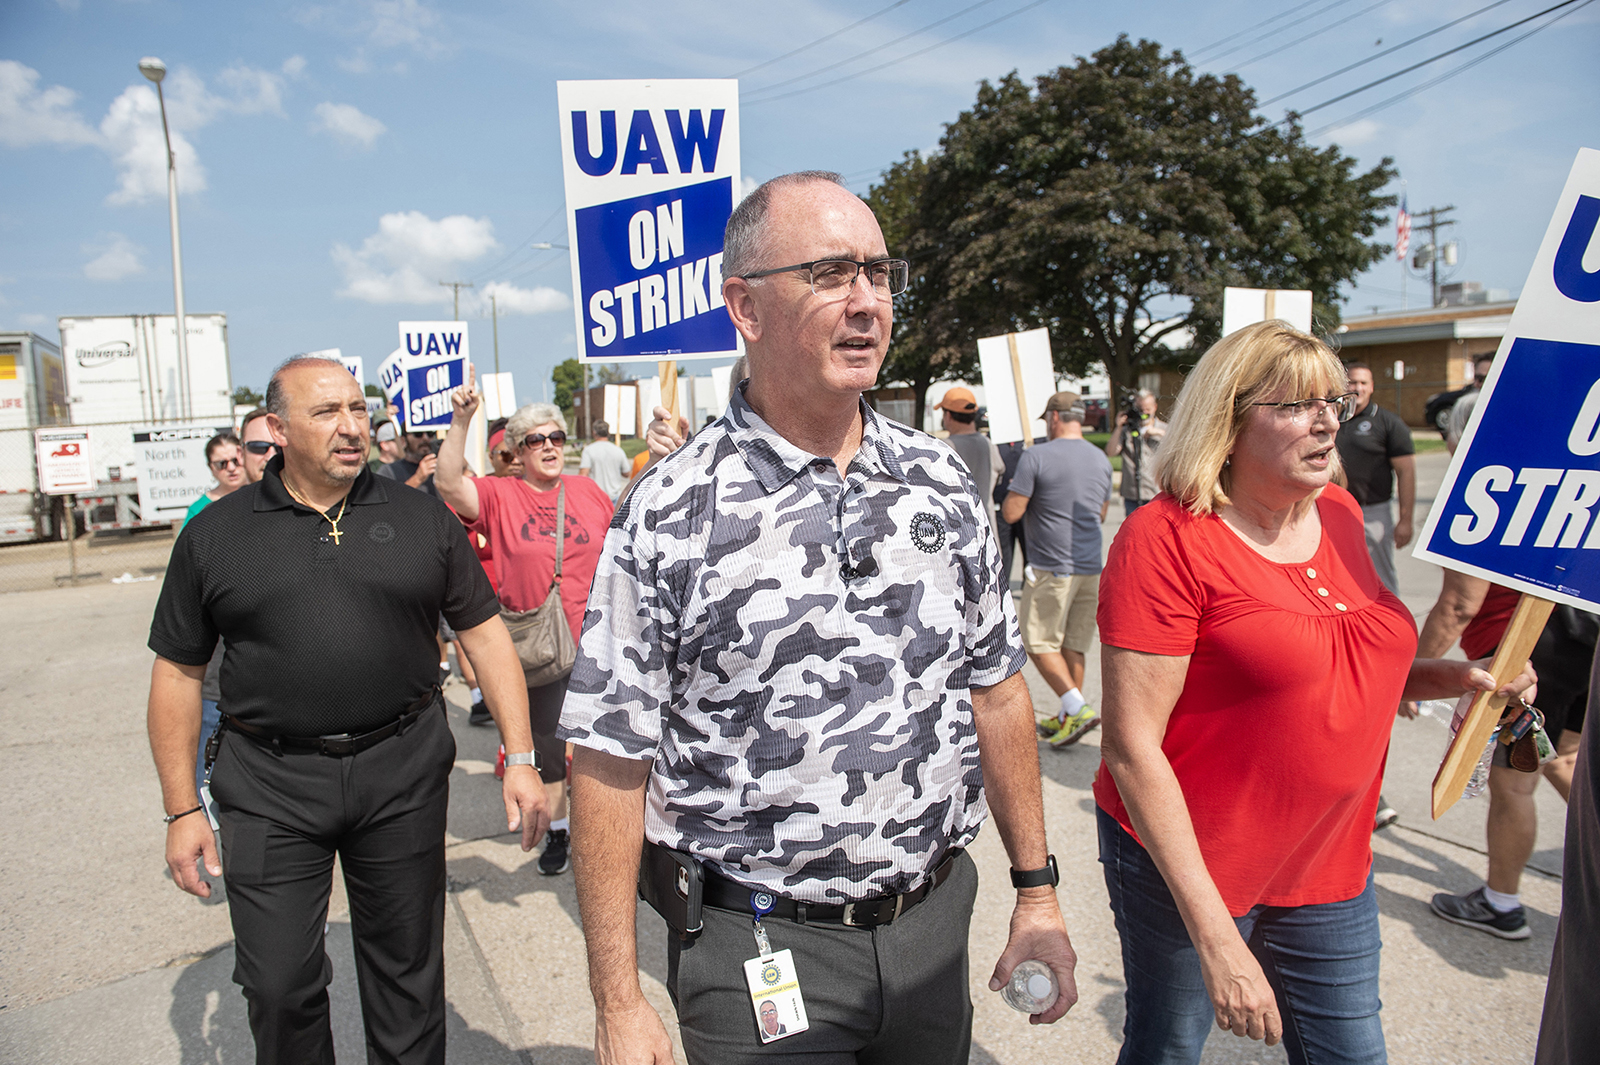 14) UAW president says Ford decision to pause work on $3.5 billion Michigan  EV battery plant is "shameful"